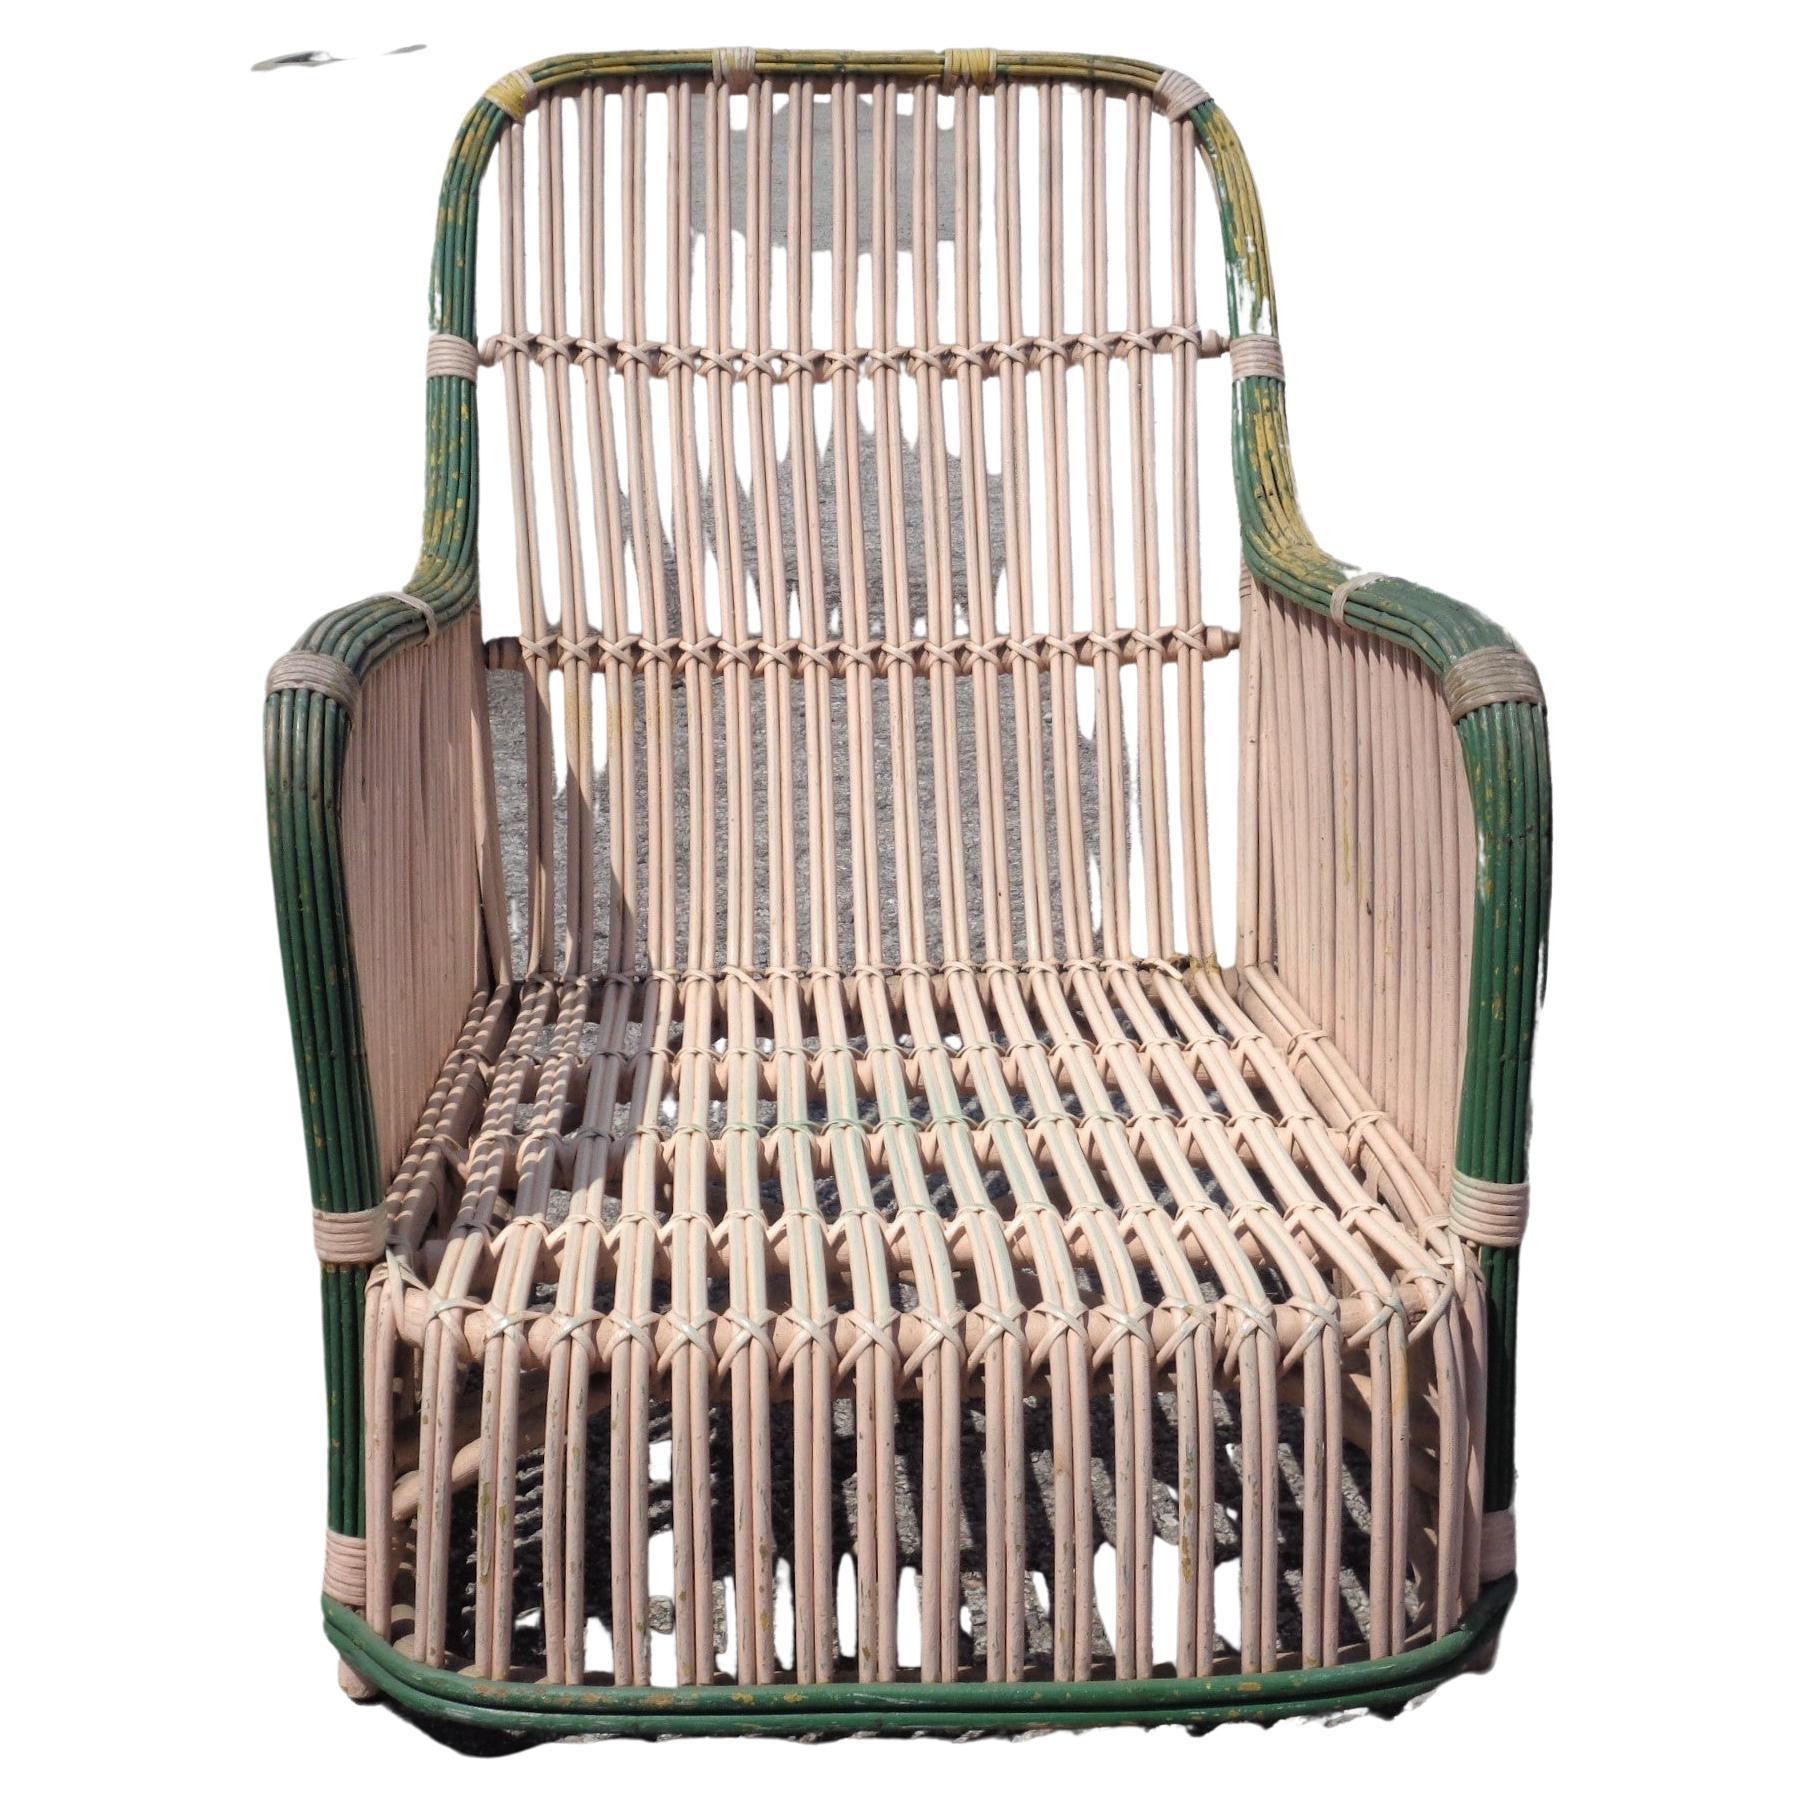  American stick wicker split reed lounge chair in old worn cream and green painted surface. Circa 1930. Beautiful. Look at all pictures and read condition report in comment section **** HAND DELIVERY CAN BE ARRANGED FROM DOOR NUMBER 3 WAREHOUSE IN